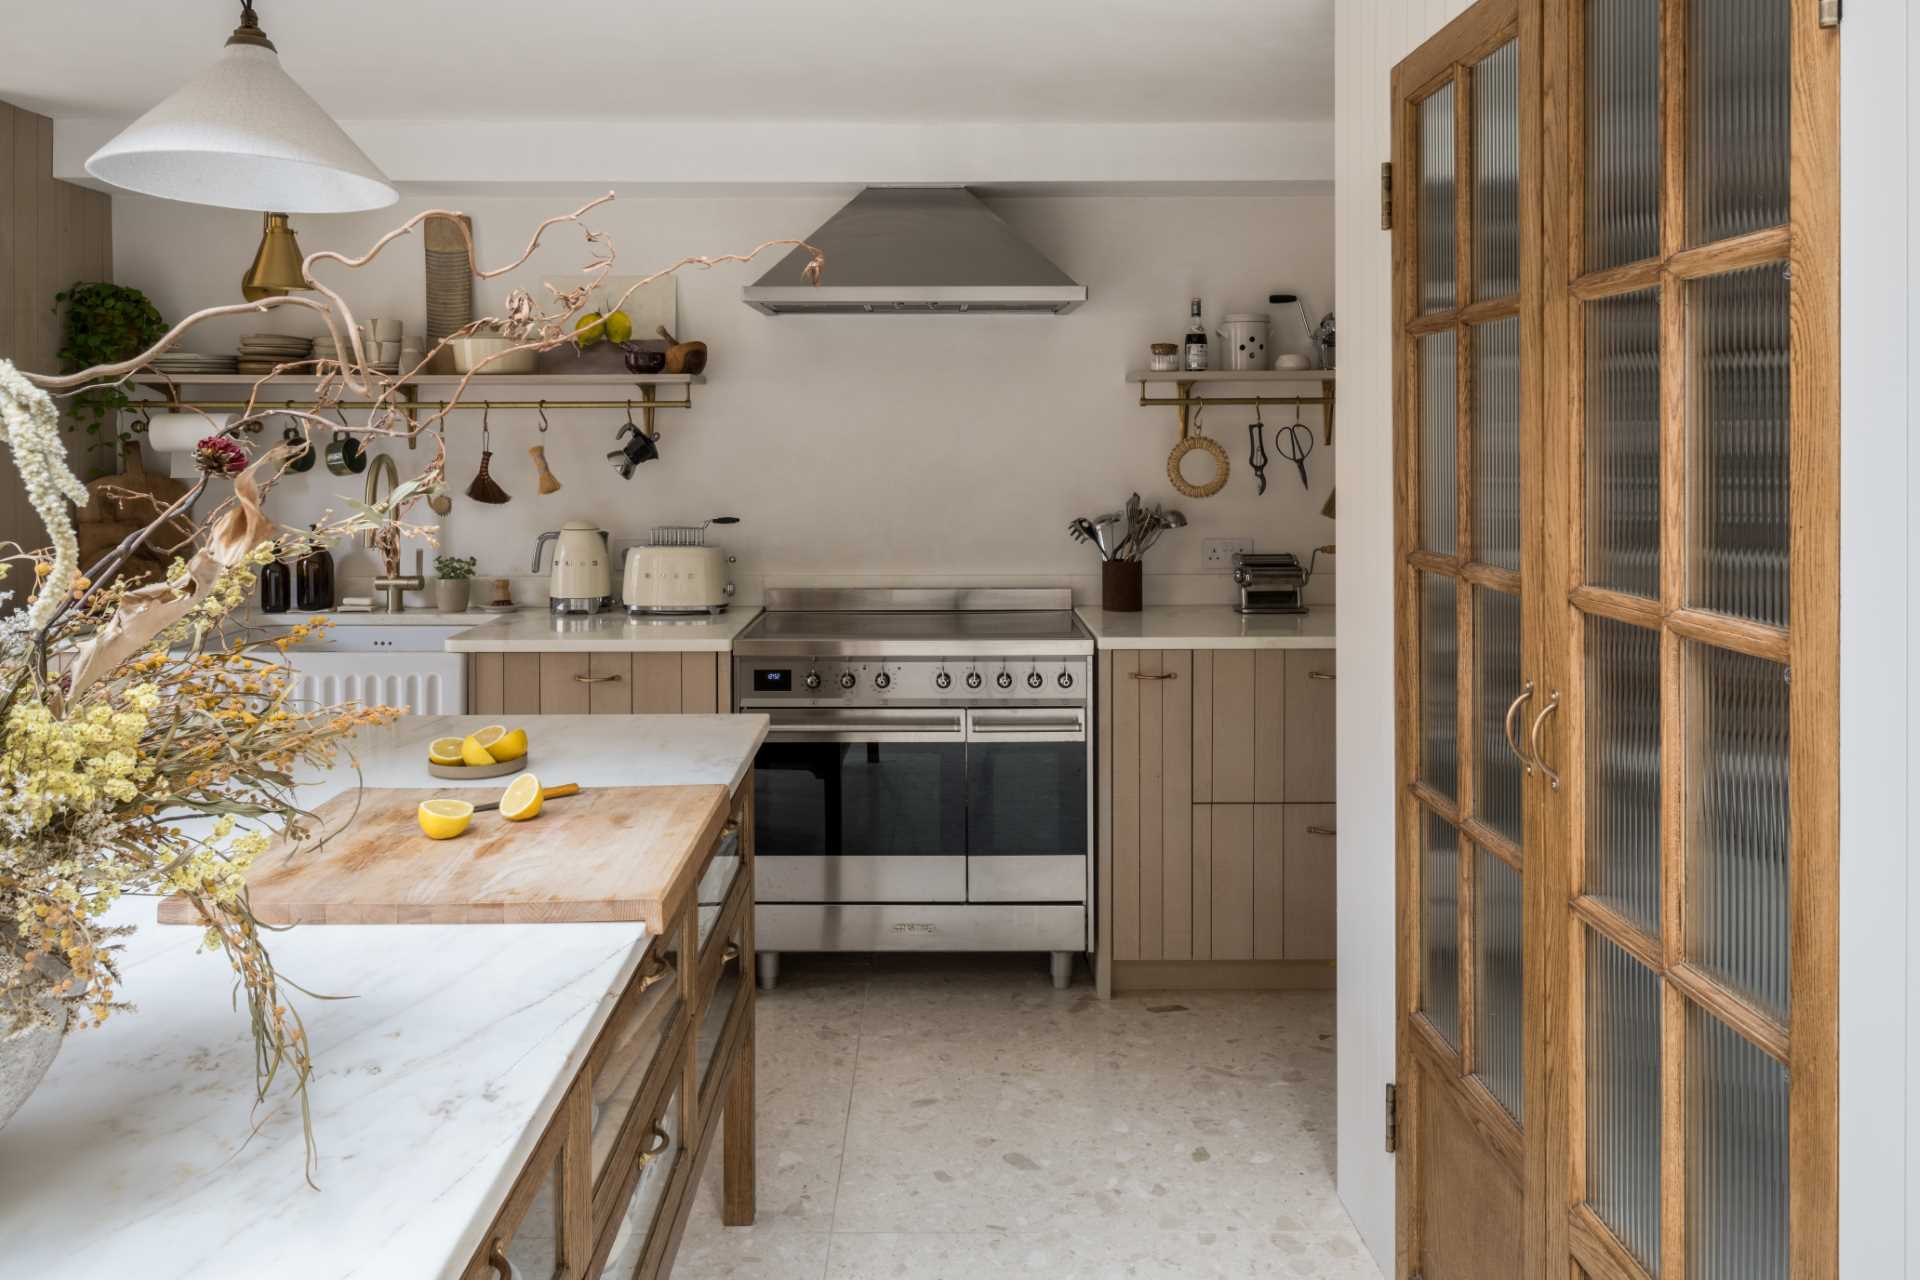 In this kitchen, the pantry doors open directly out onto the multi-functioning marble-topped preparation island.